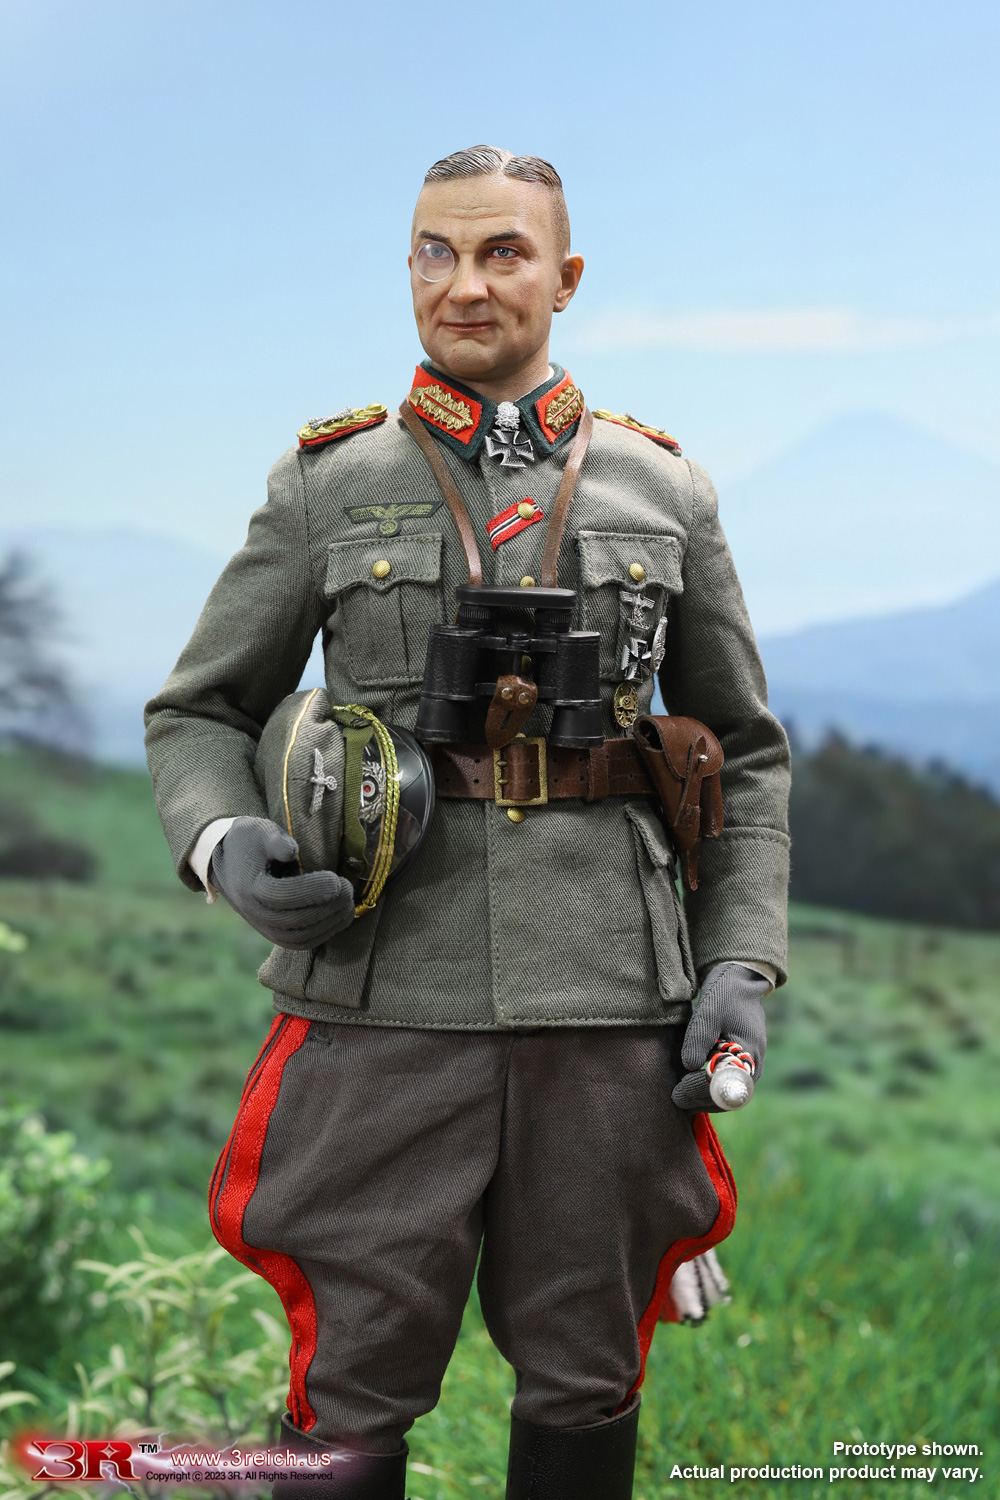 newproduct - NEW PRODUCT: 3R (DiD): Walter Model  German General Field Marshal  ITEM NO: GM652 952